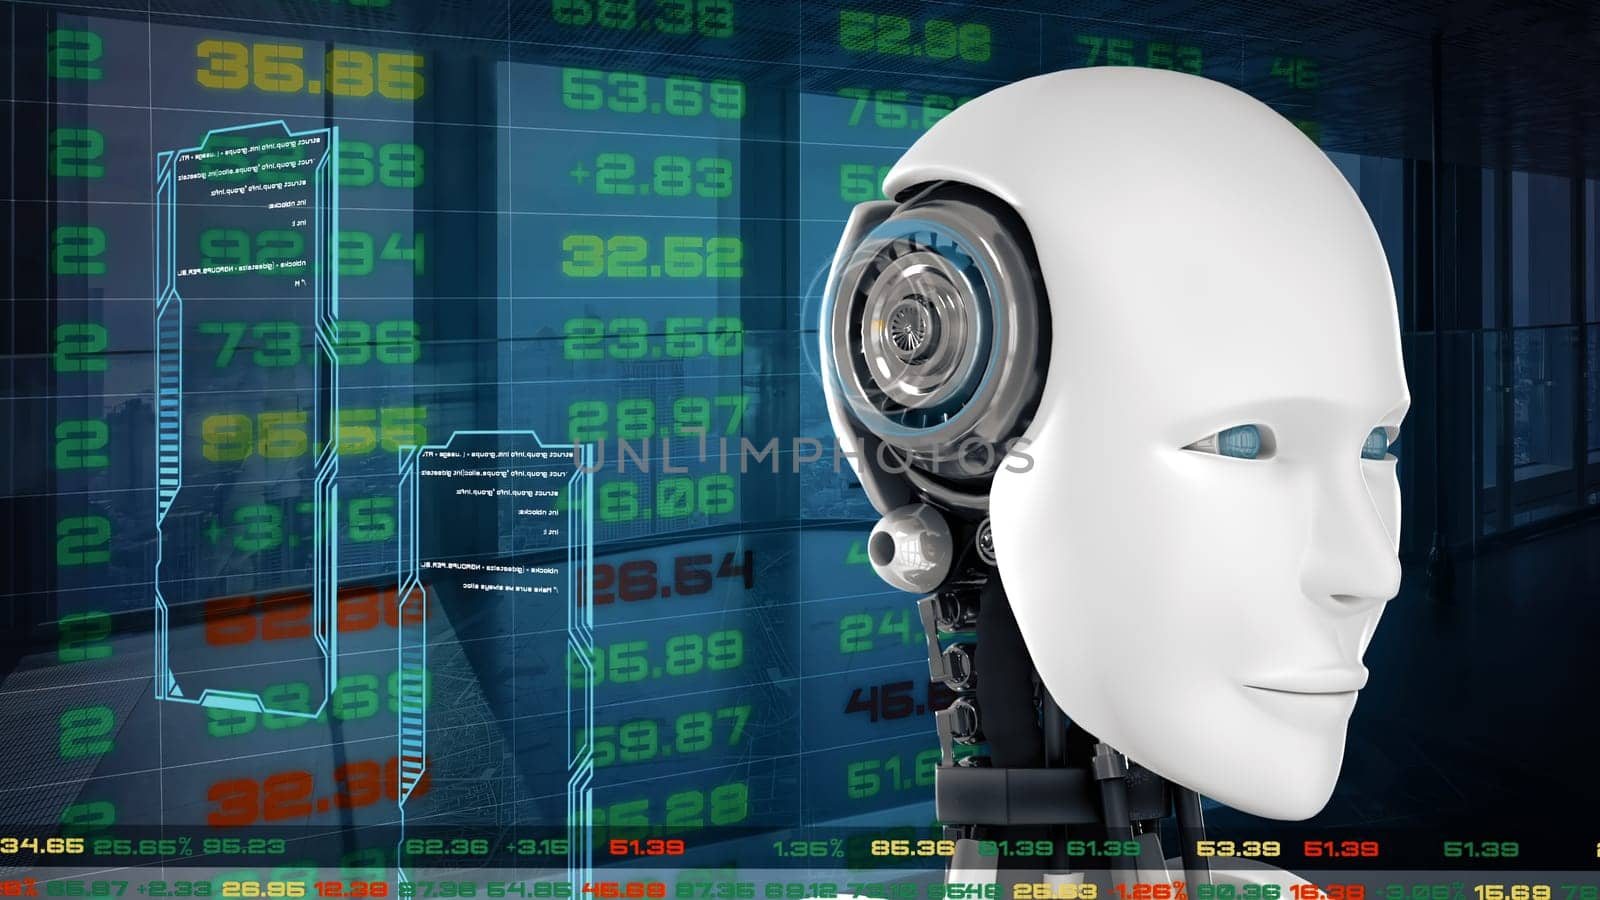 XAI Futuristic robot, artificial intelligence CGI for stock exchange market trading by biancoblue